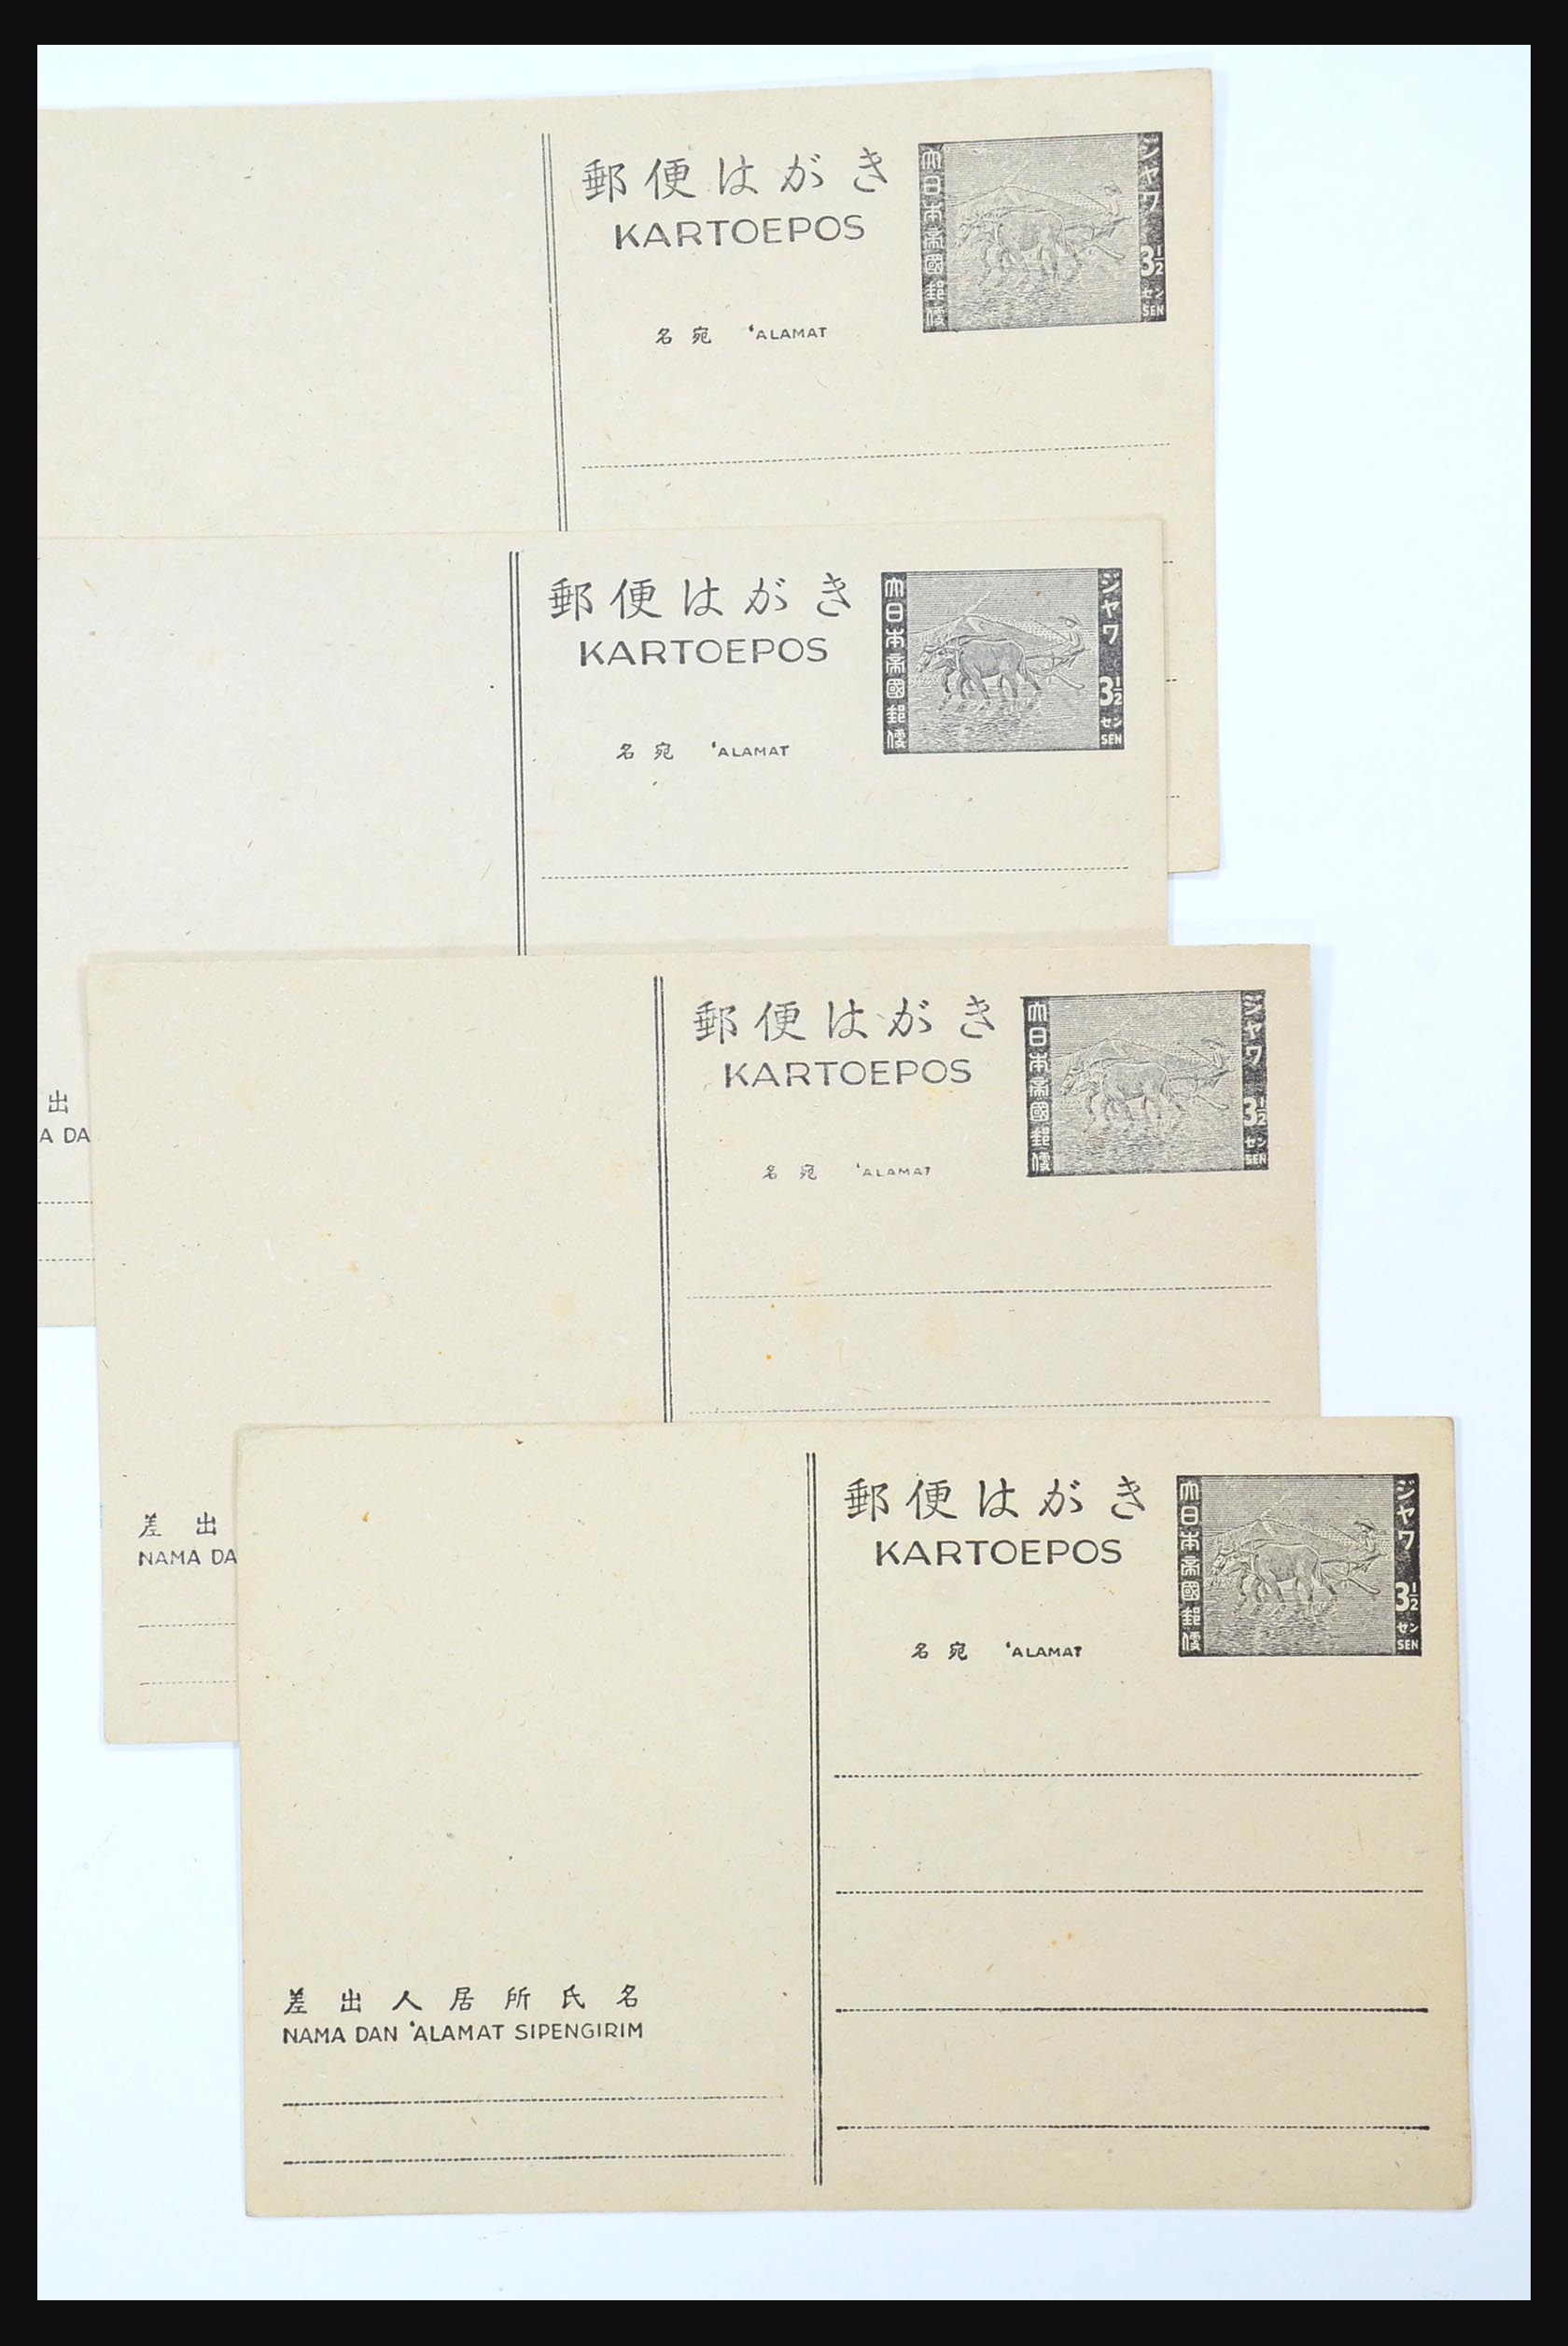 31362 078 - 31362 Netherlands Indies Japanese occupation covers 1942-1945.